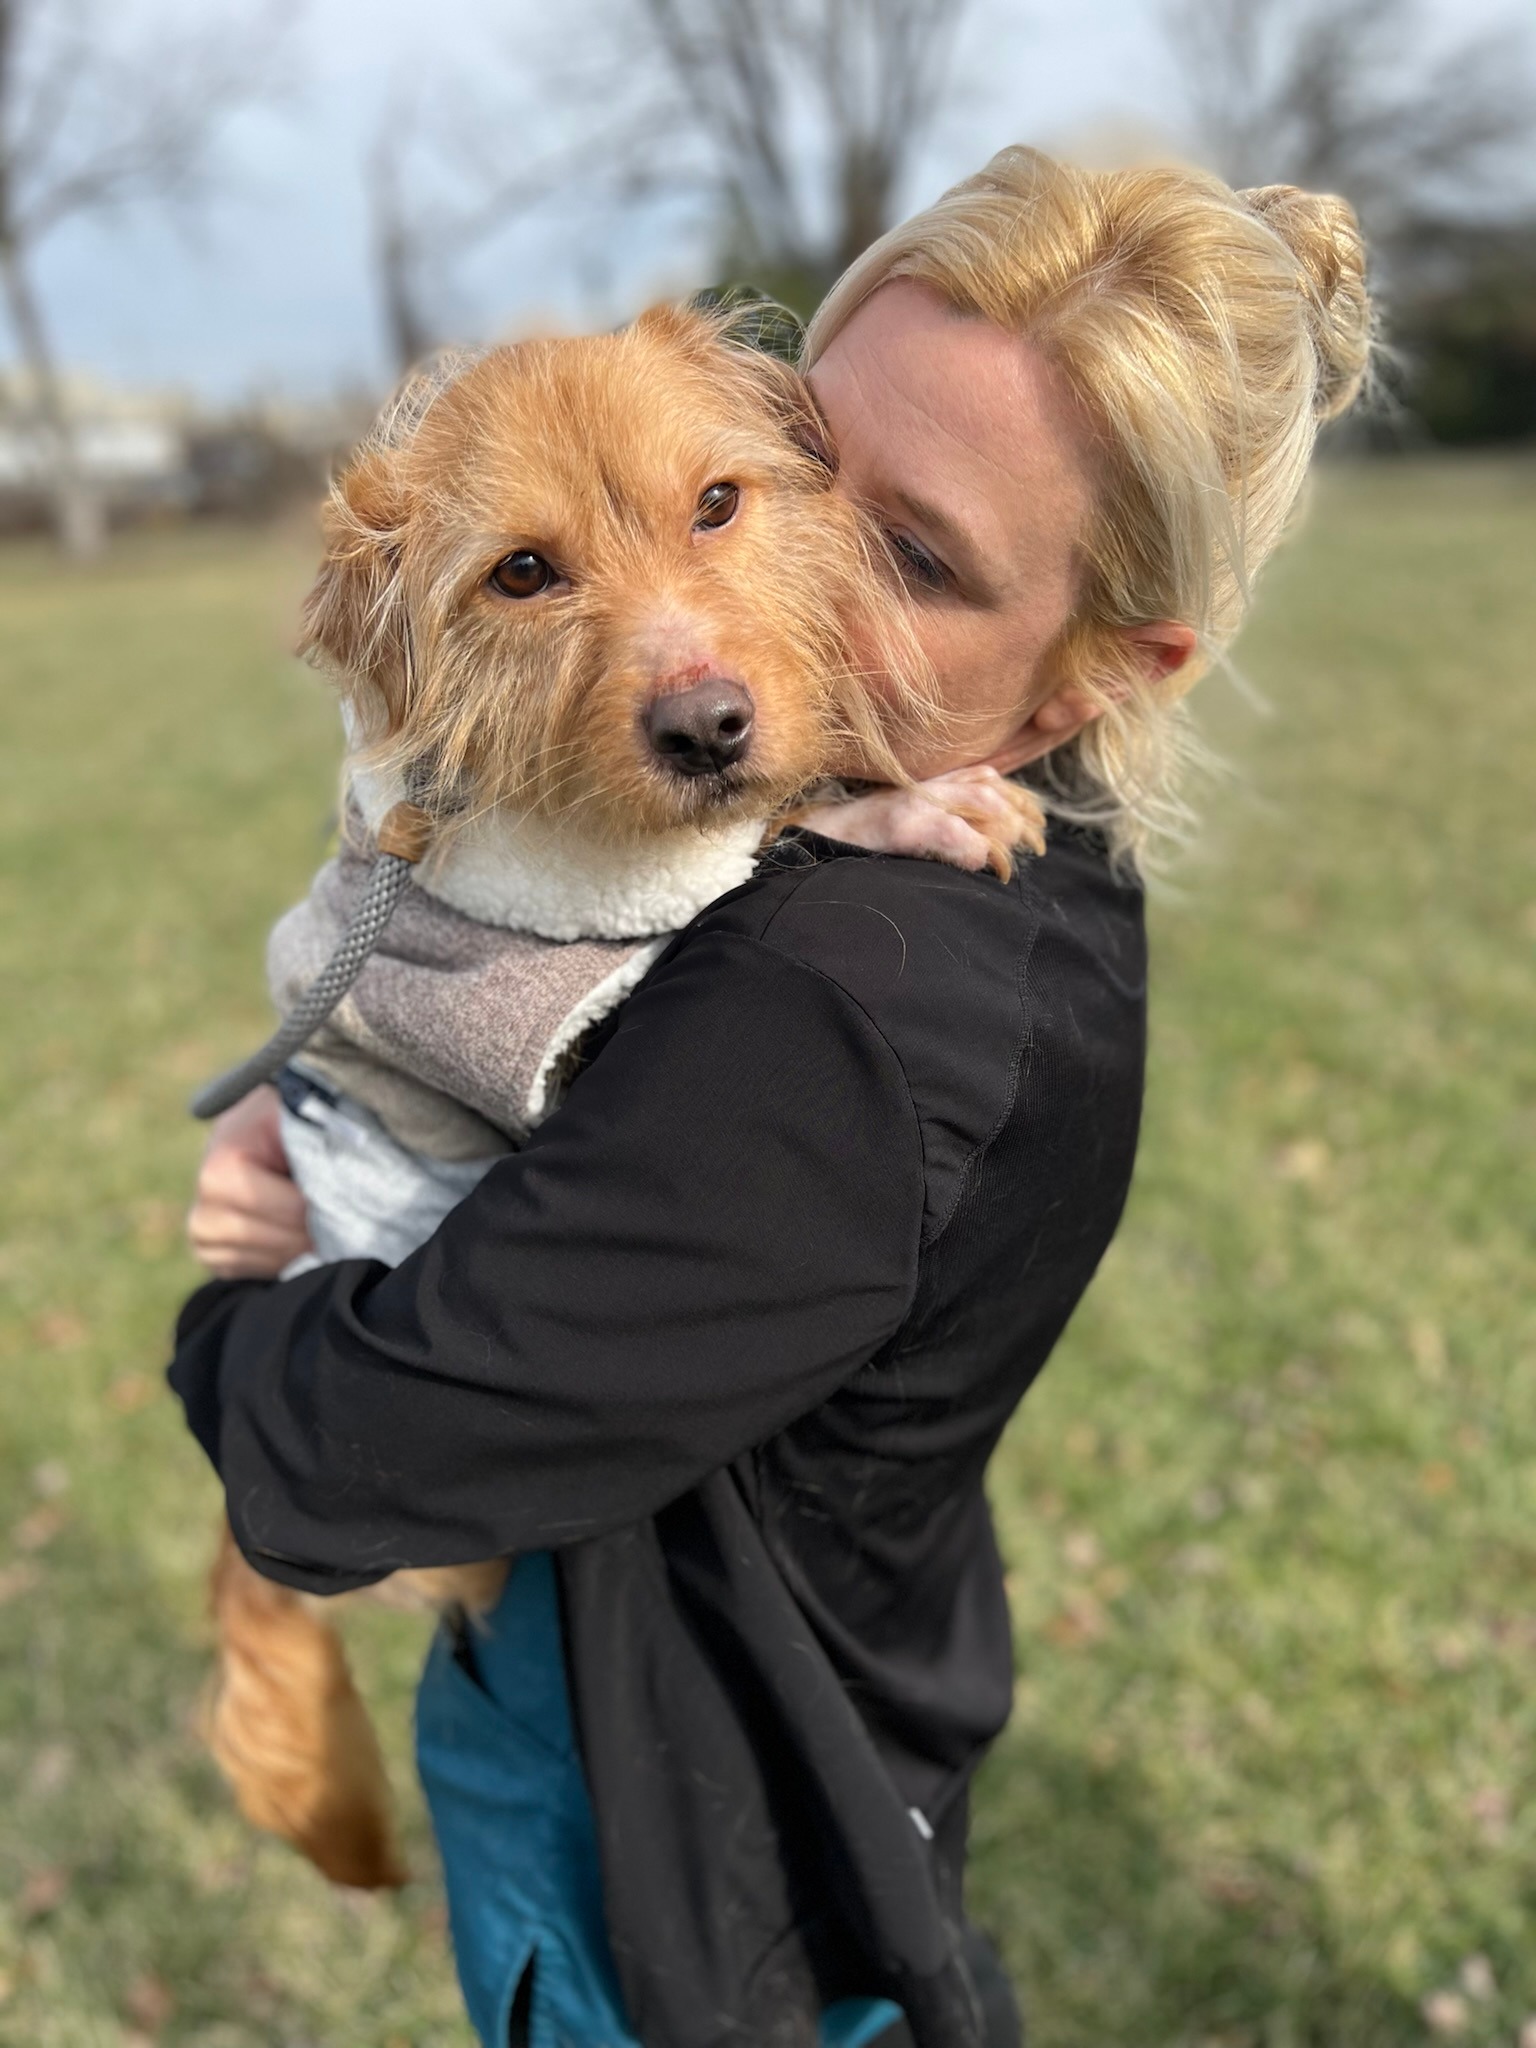 blonde woman holding a adopted dog